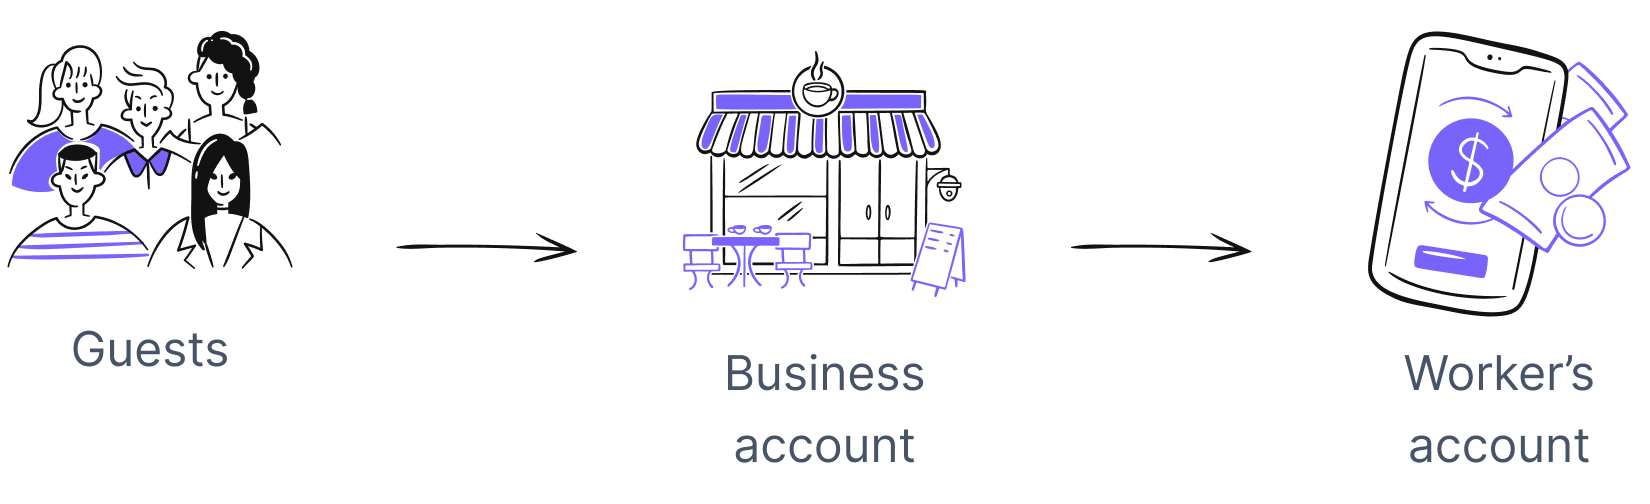 Business account